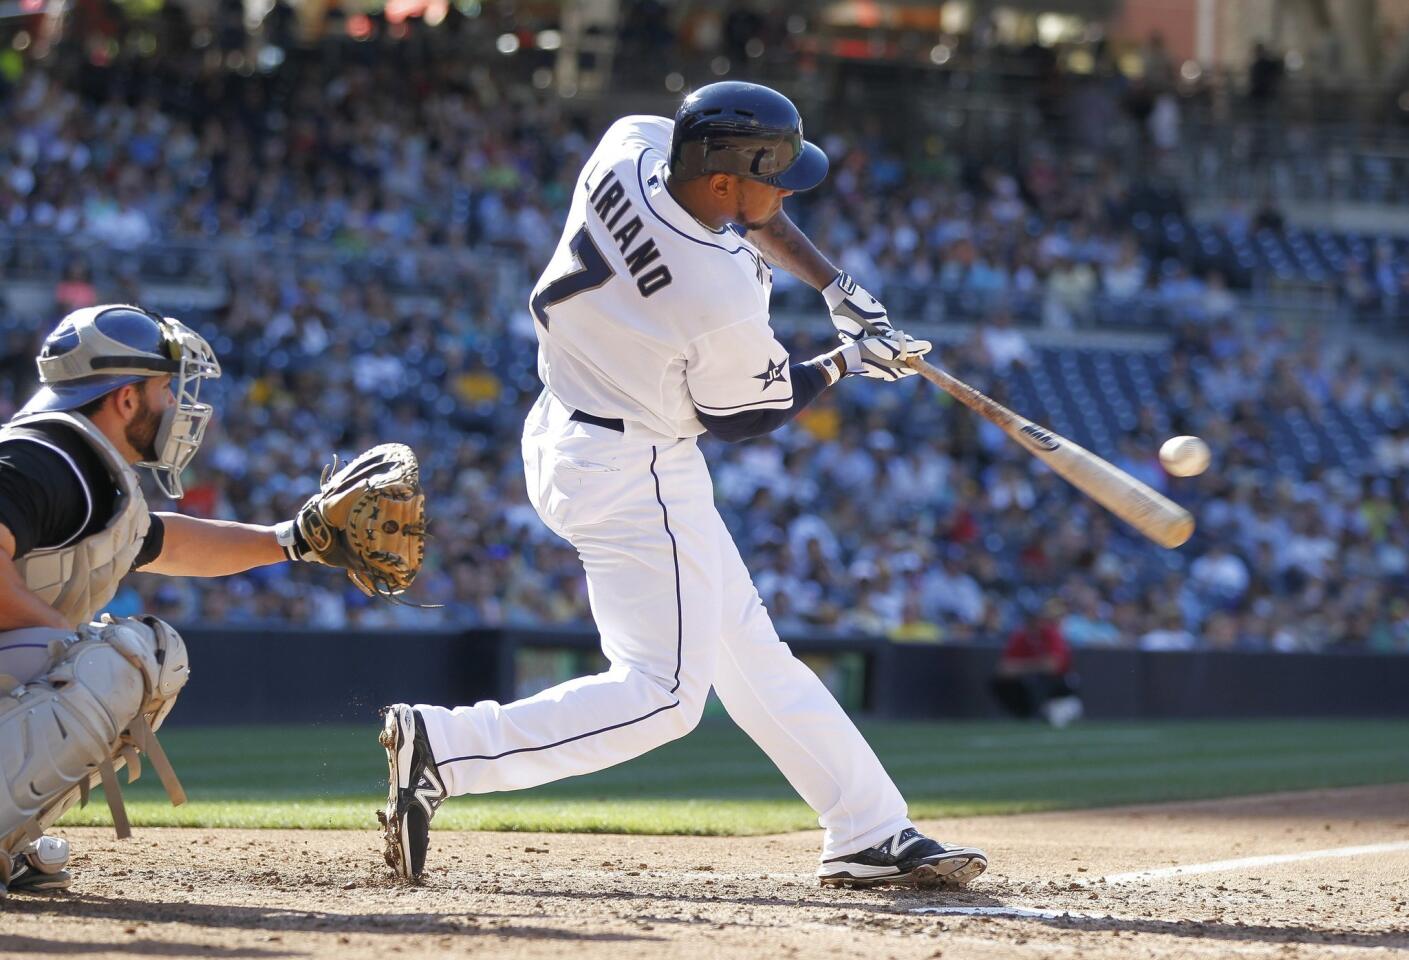 The Padres' Rymer Liriano hits a two run home run in the fourth inning. The Padres beat the Rockies 5-3 at Petco Park on Wednesday, August 13, 2014.